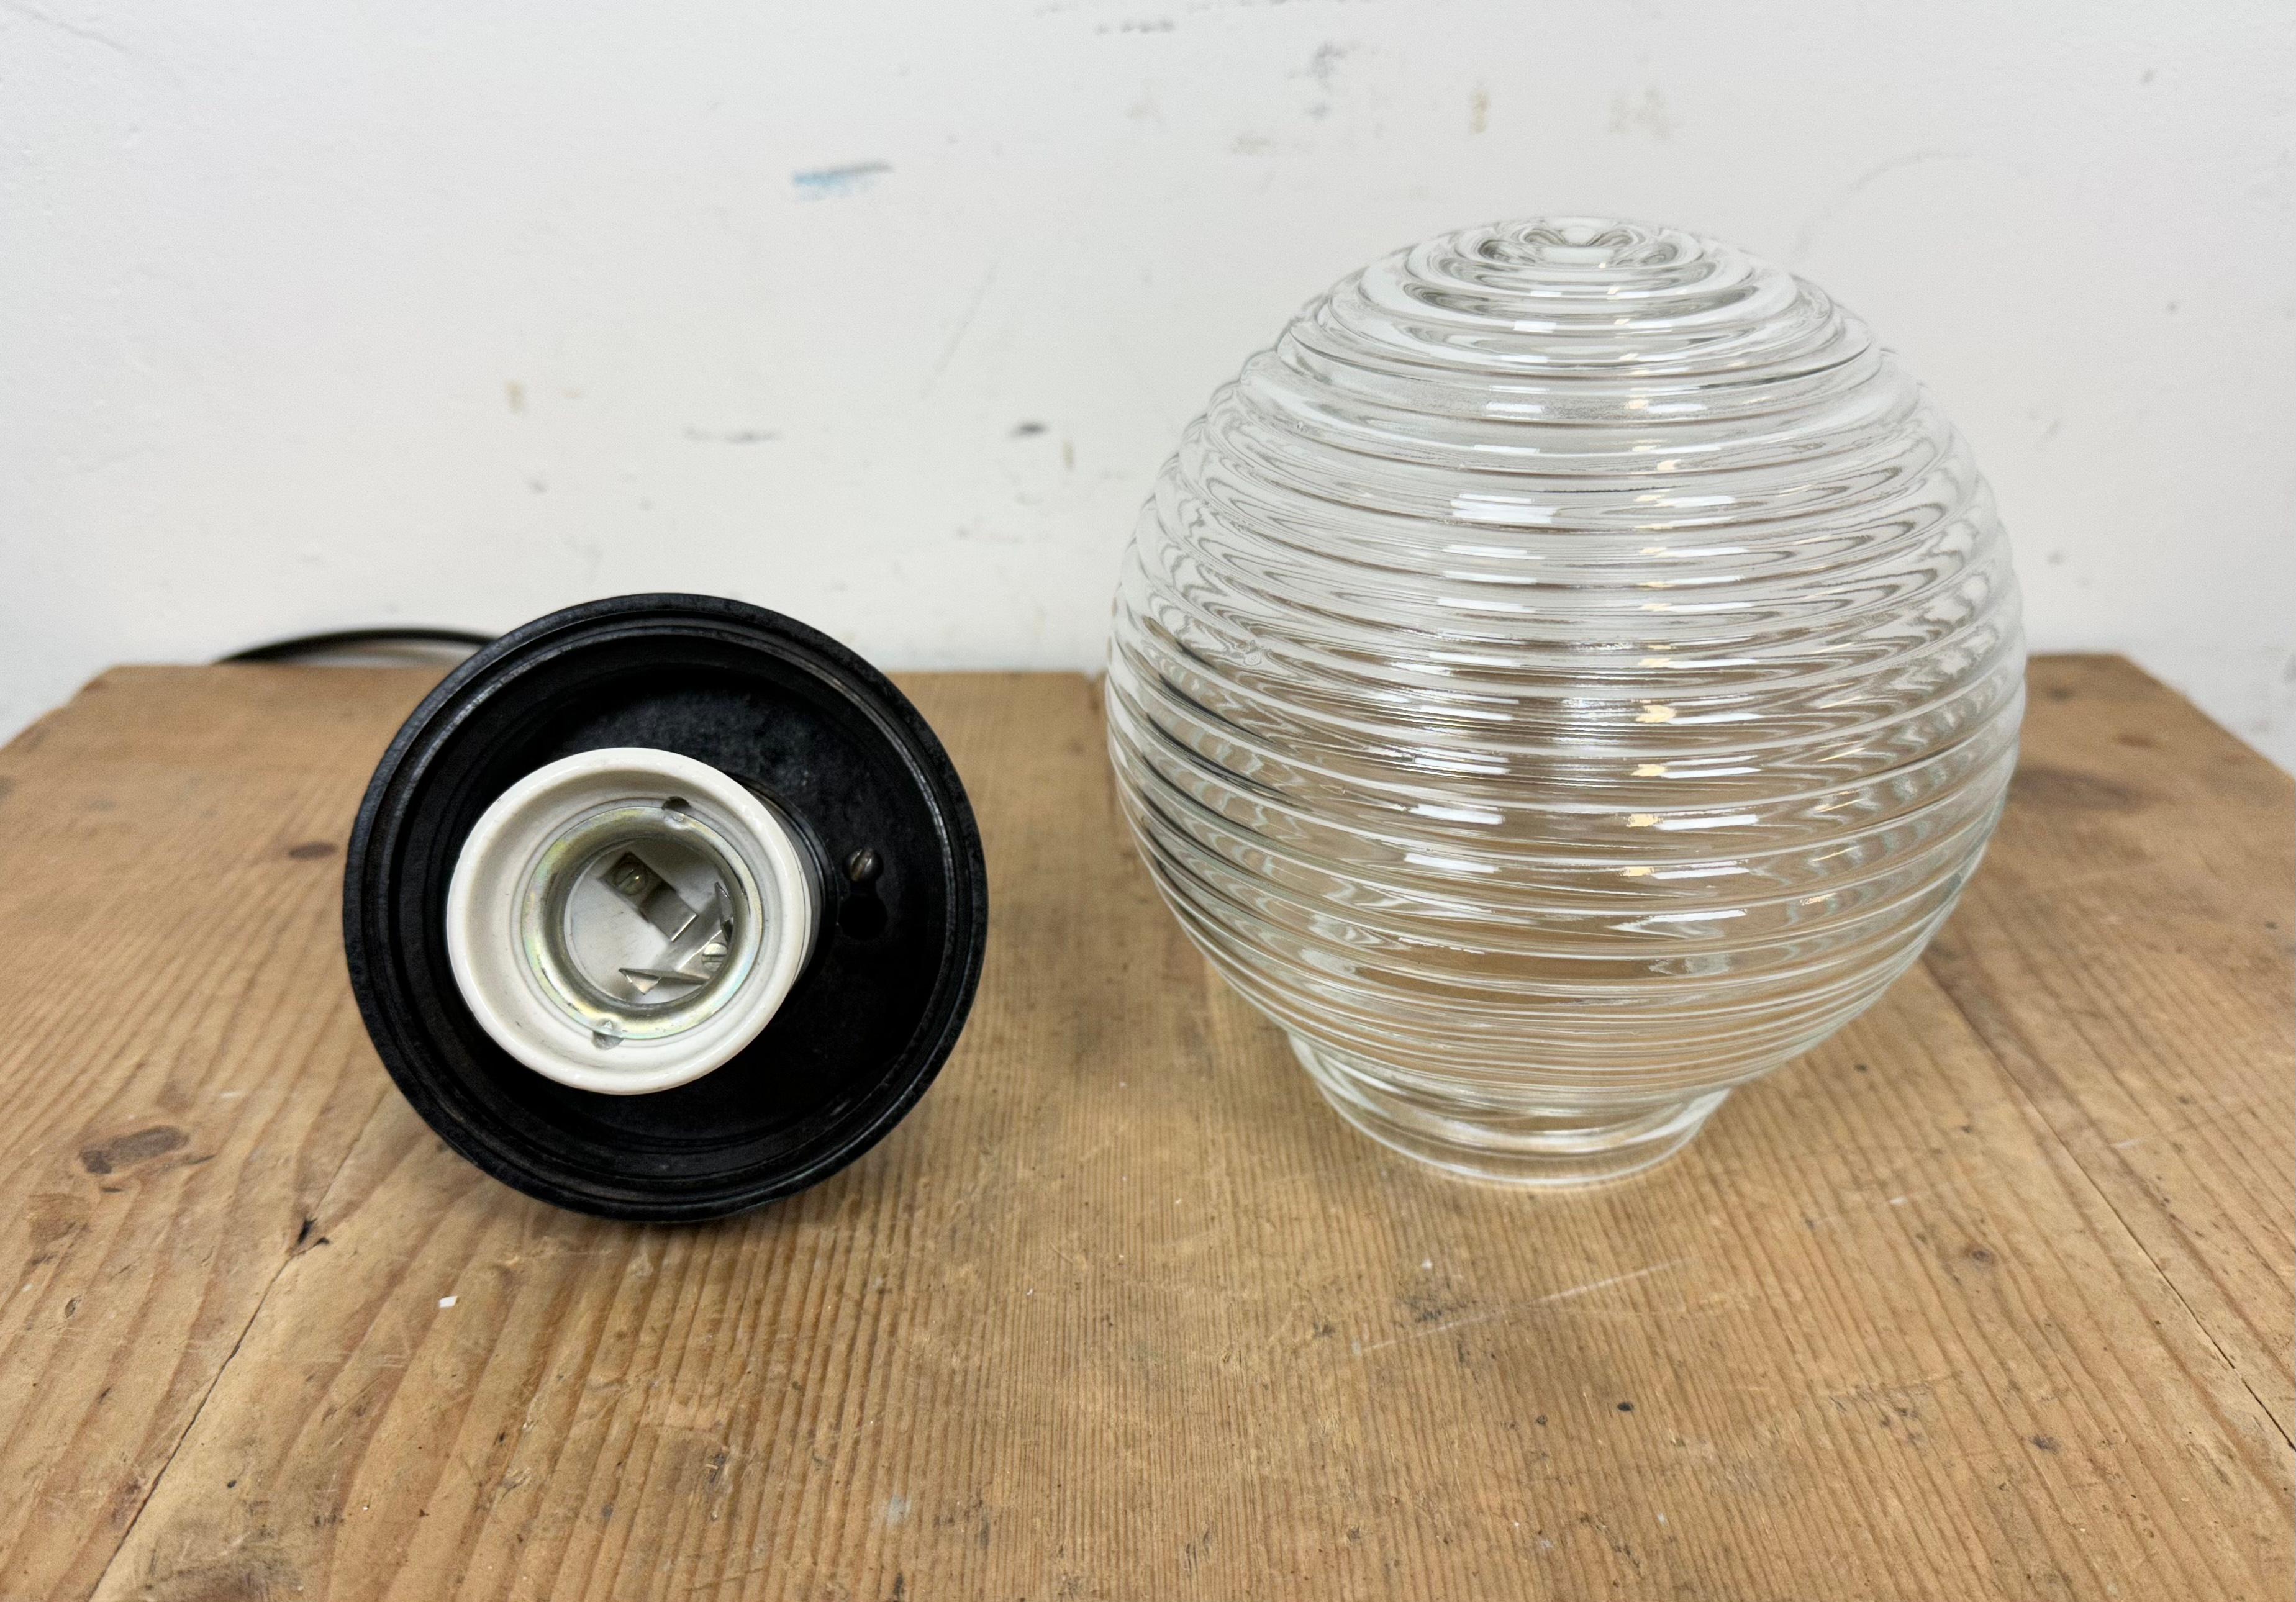 Industrial Bakelite Pendant Light with Ribbed Glass, 1970s For Sale 7